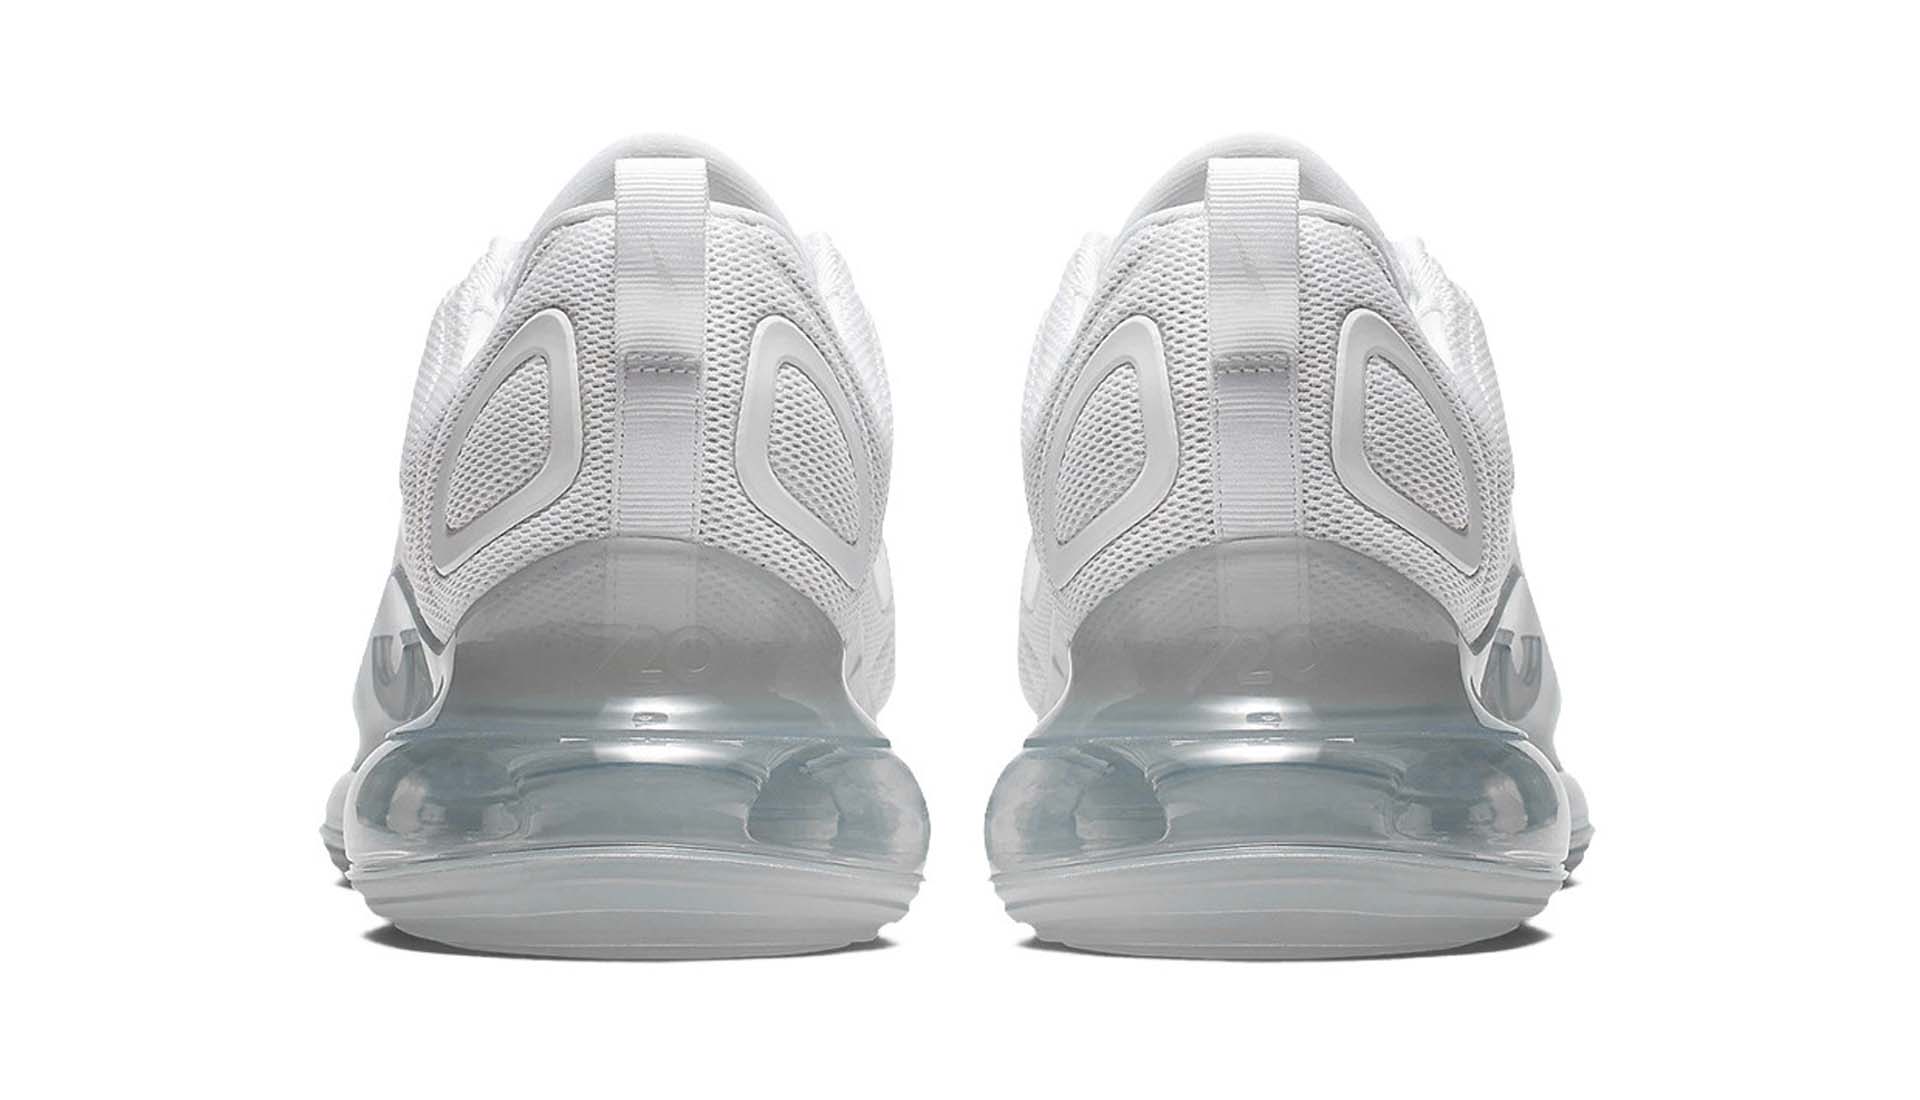 Nike Air Max 720 Takes On A 